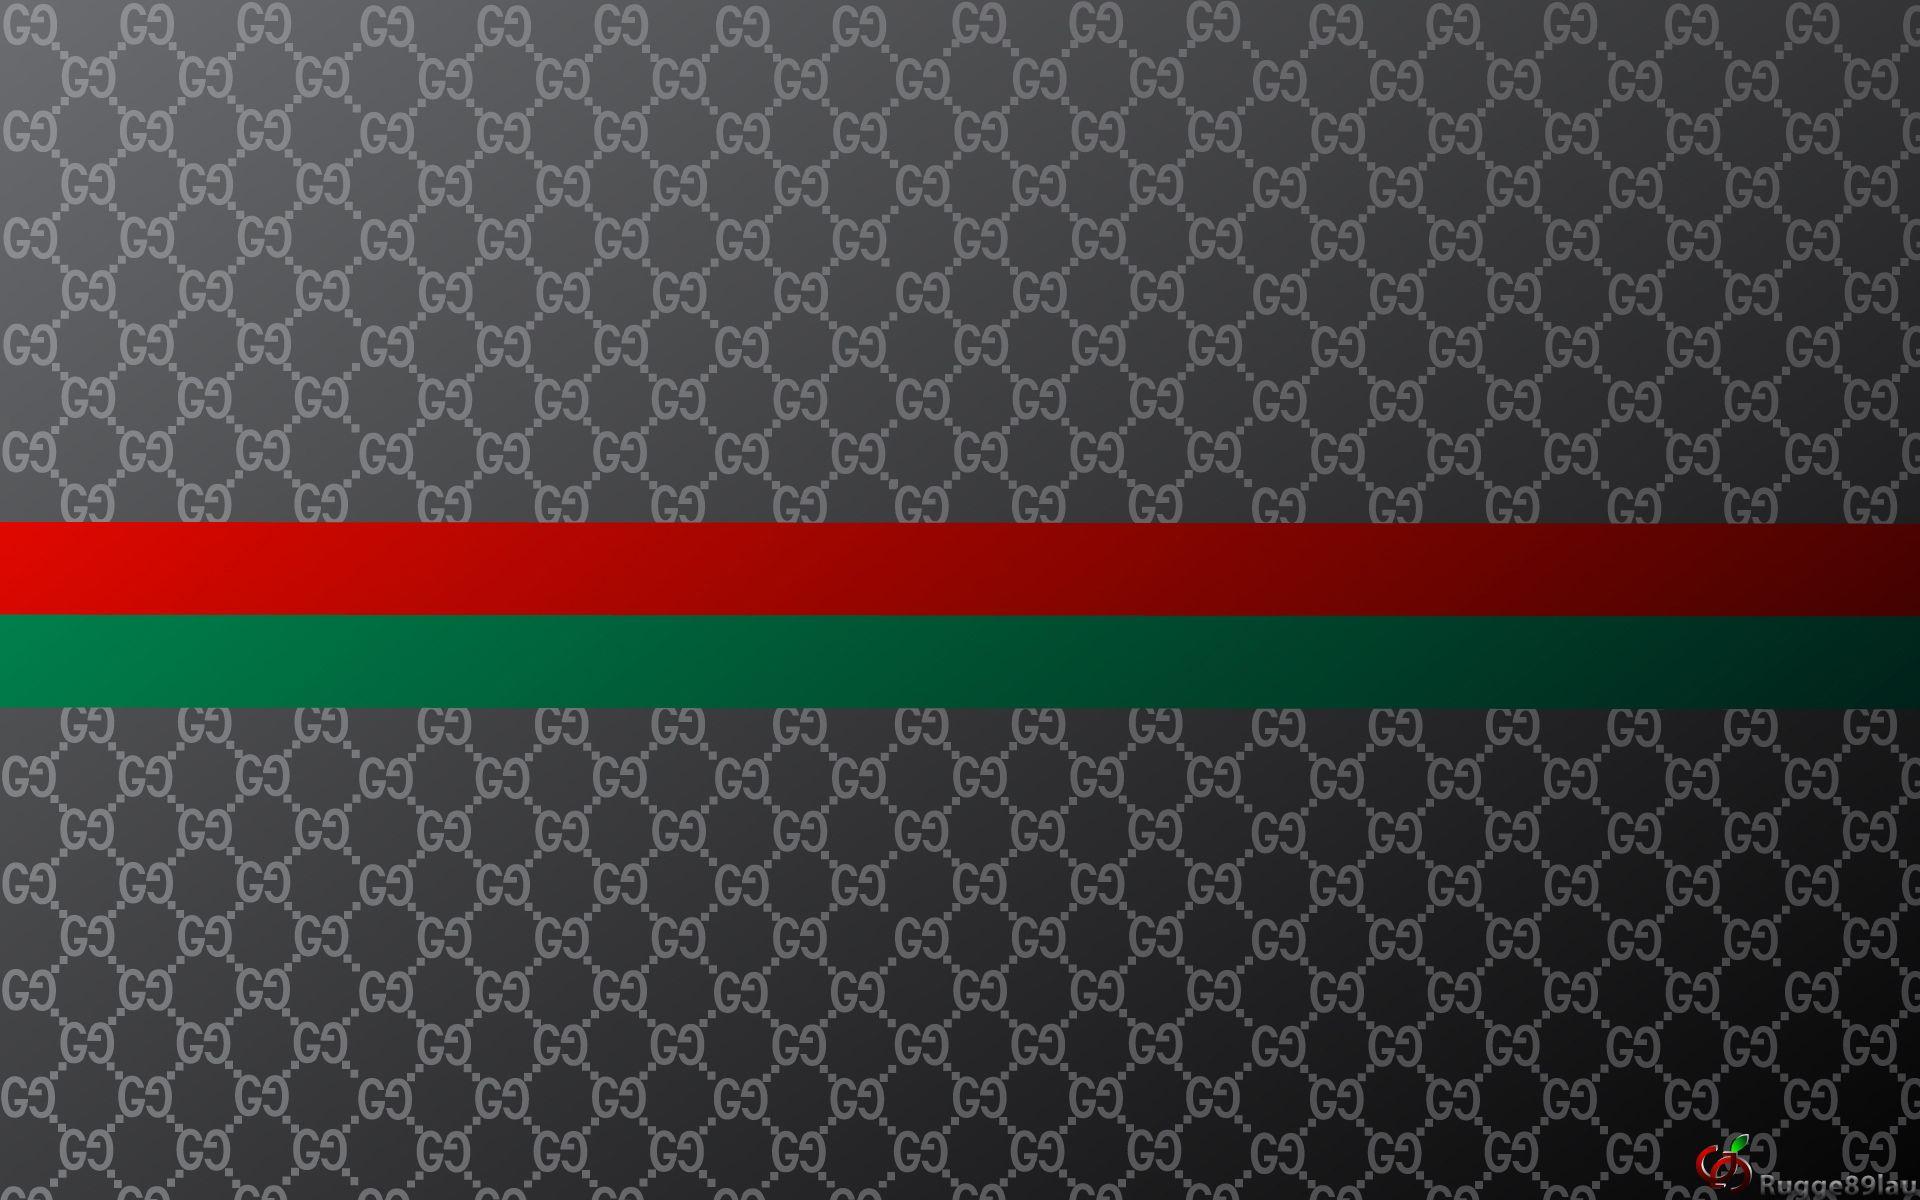 Gucci HD Wallpapers